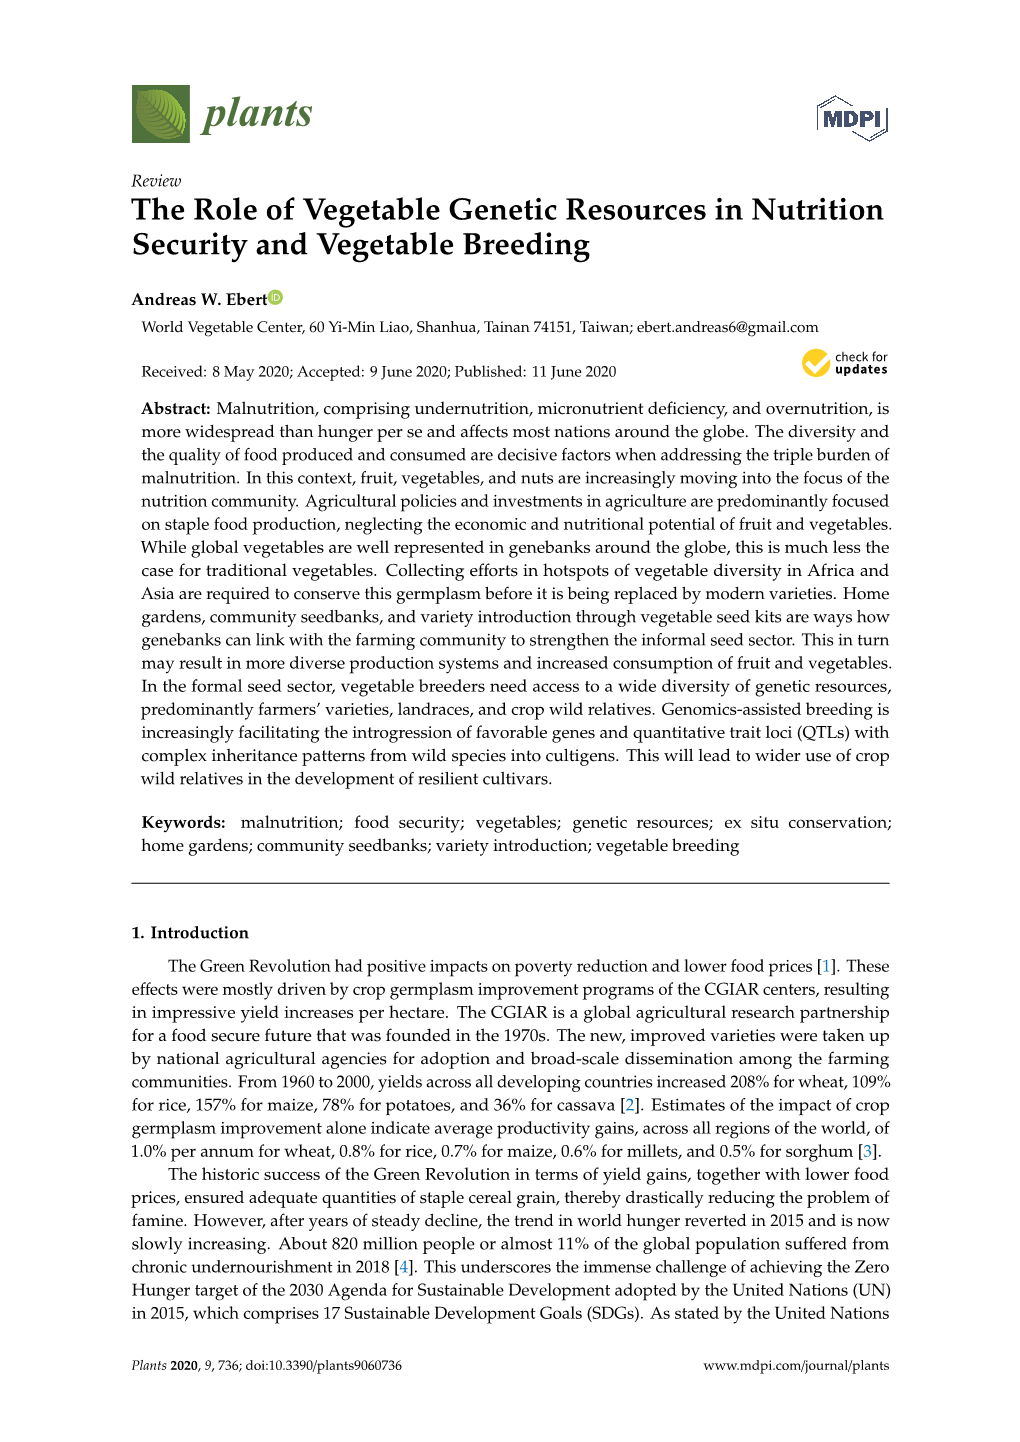 The Role of Vegetable Genetic Resources in Nutrition Security and Vegetable Breeding